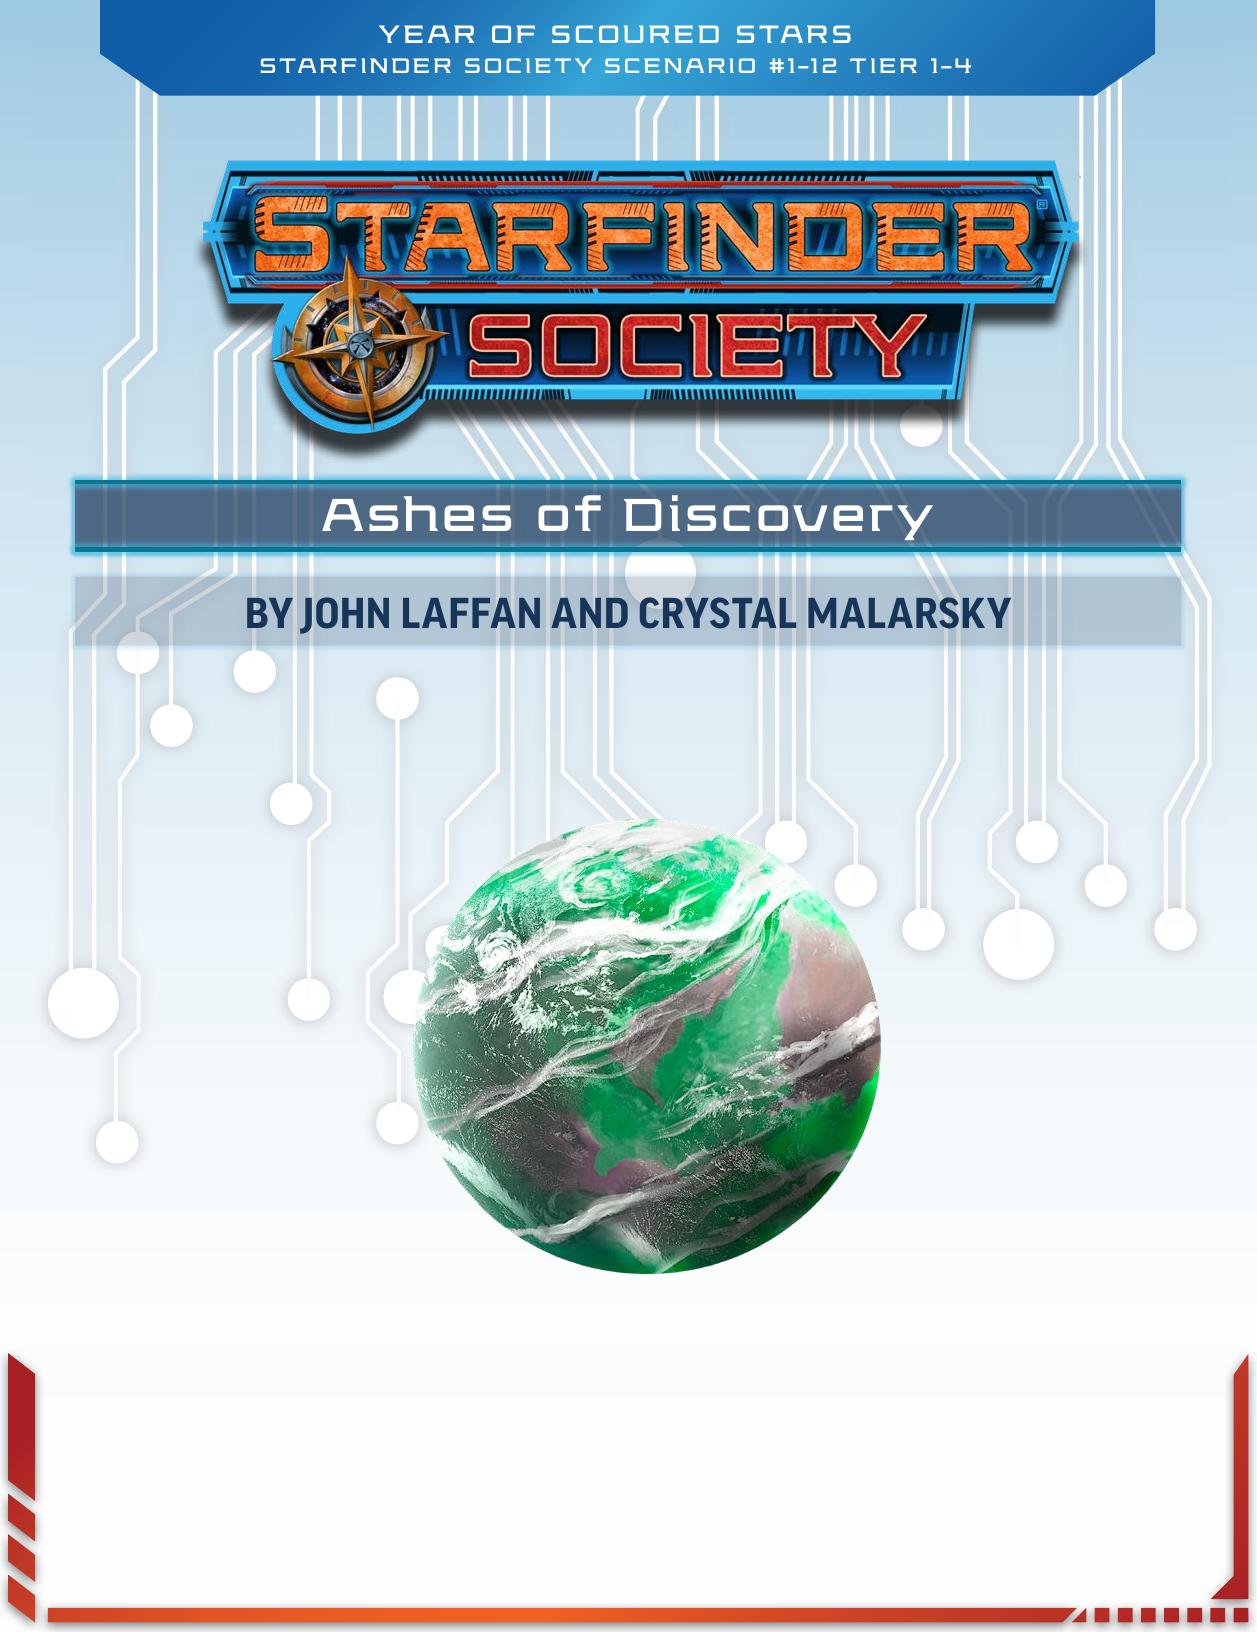 Ashes of Discovery